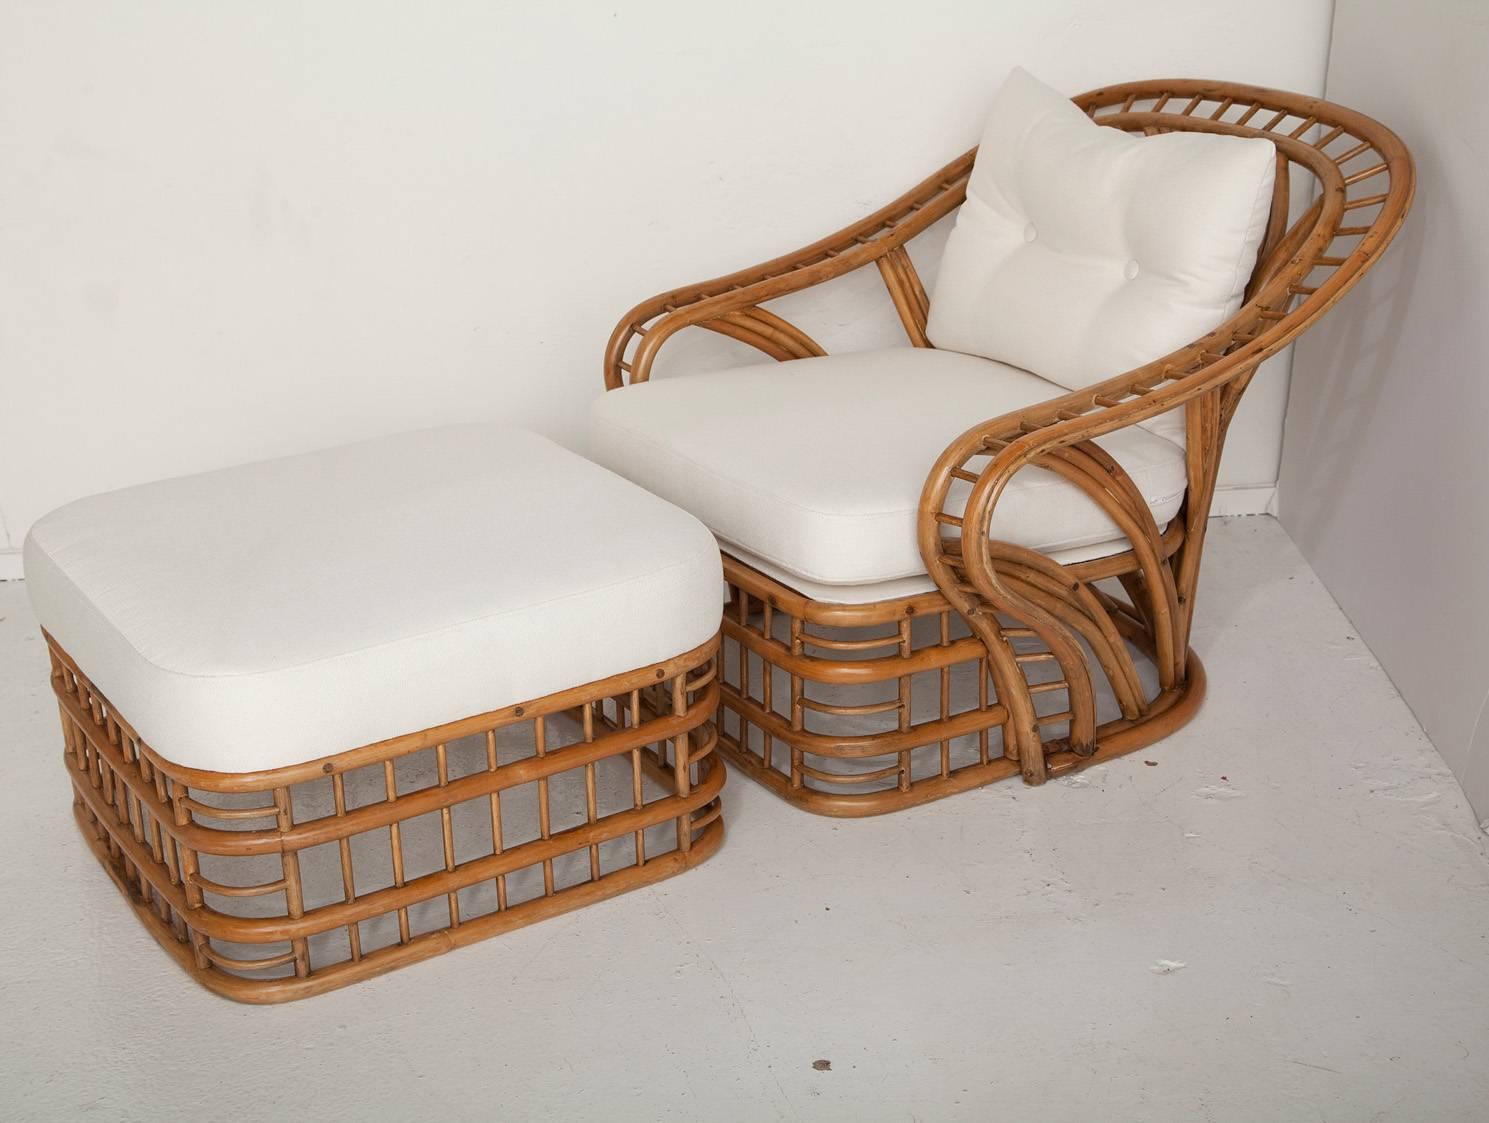 This classic and curvaceous fully restored 1970s bamboo lounge chair and ottoman, newly upholstered in a soft all-weather oxford cloth, looks as good from the back as it does from the front. Ottoman measures H 14 in. x W 24 in. x D 24 in.